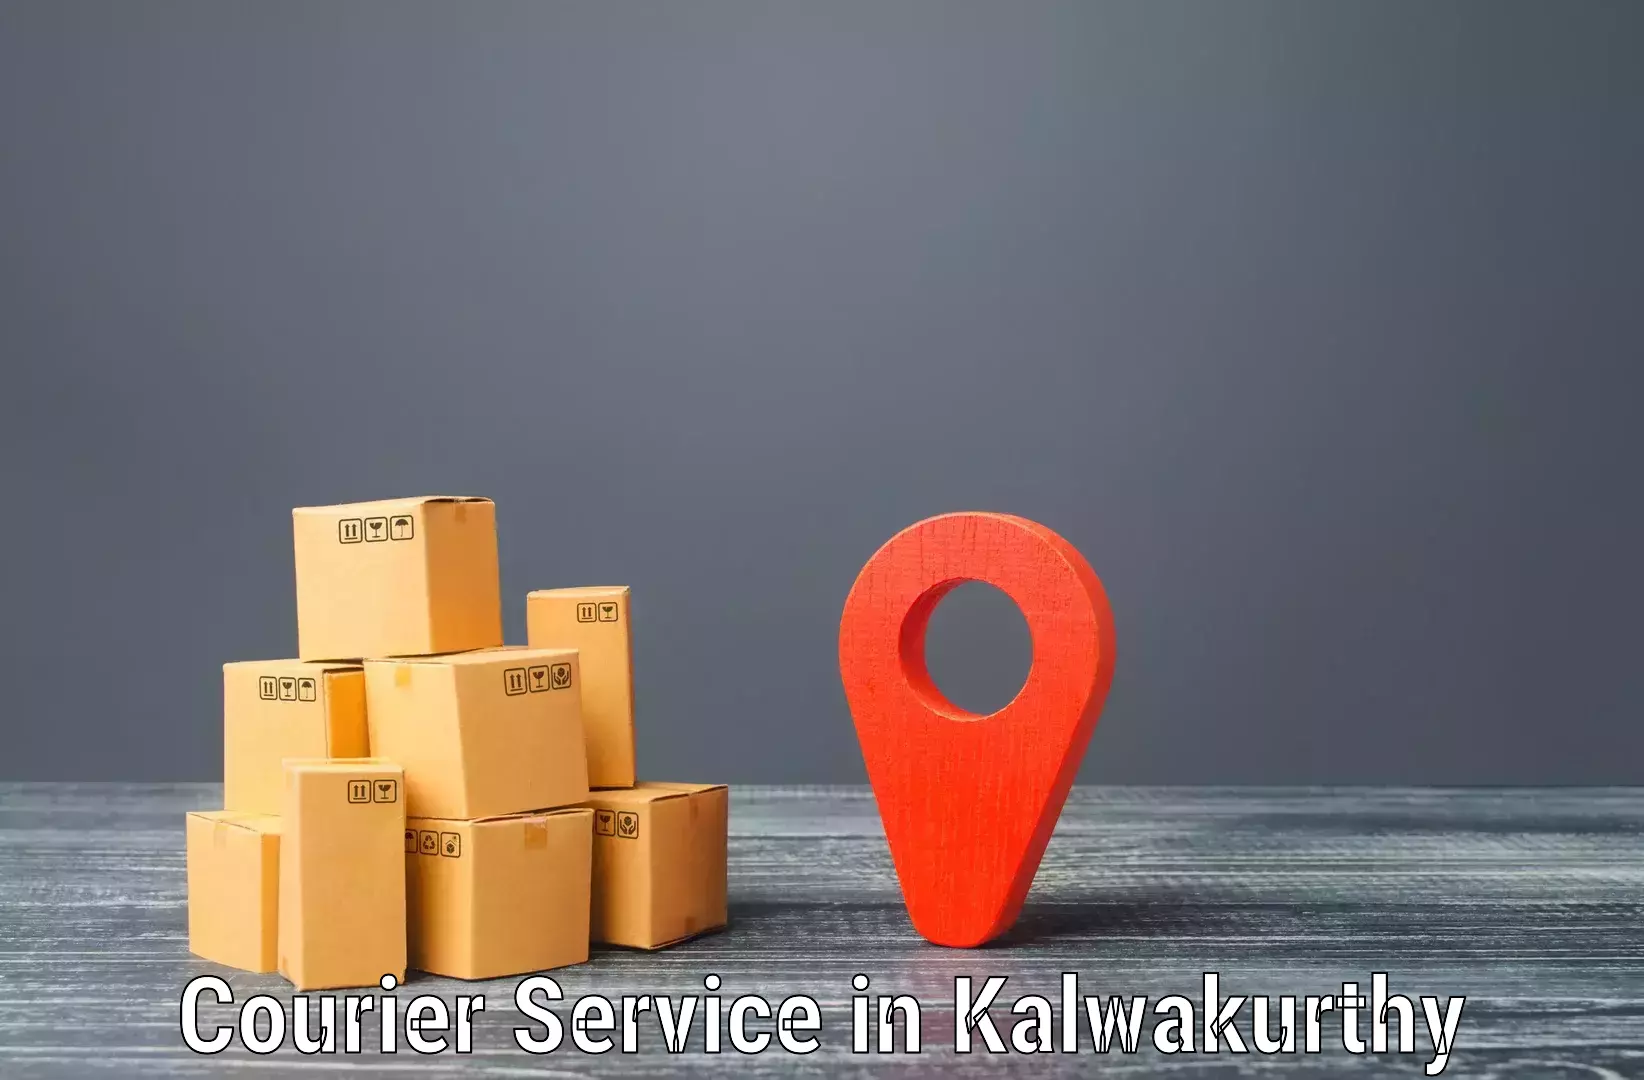 Courier service partnerships in Kalwakurthy